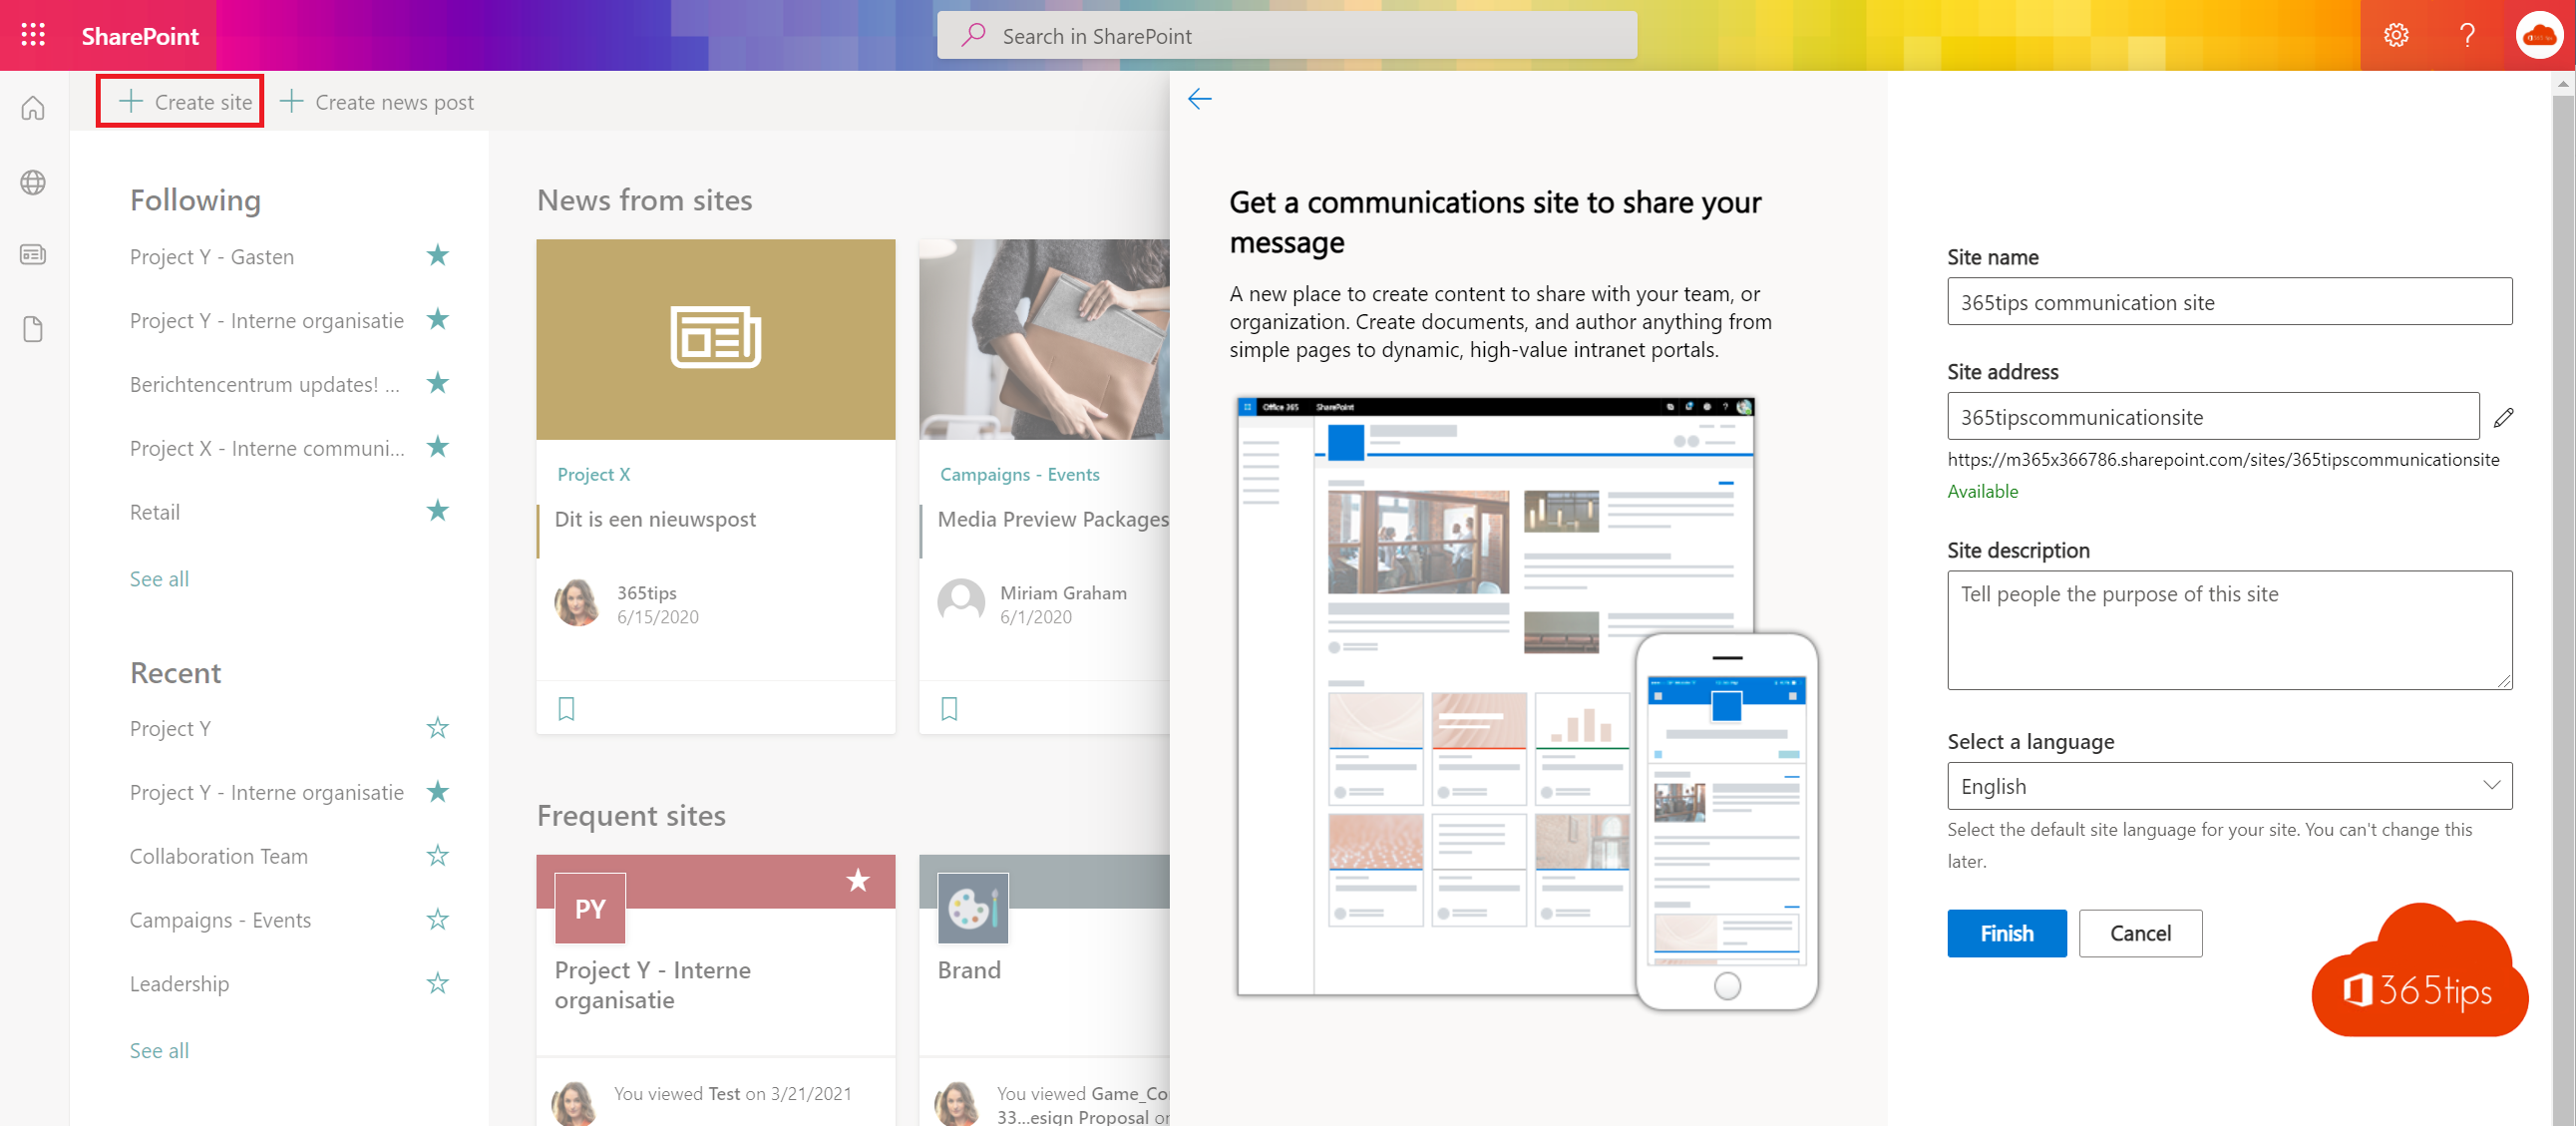 Tutorial: How to create a communication site in SharePoint Online  &amp; Microsoft Teams